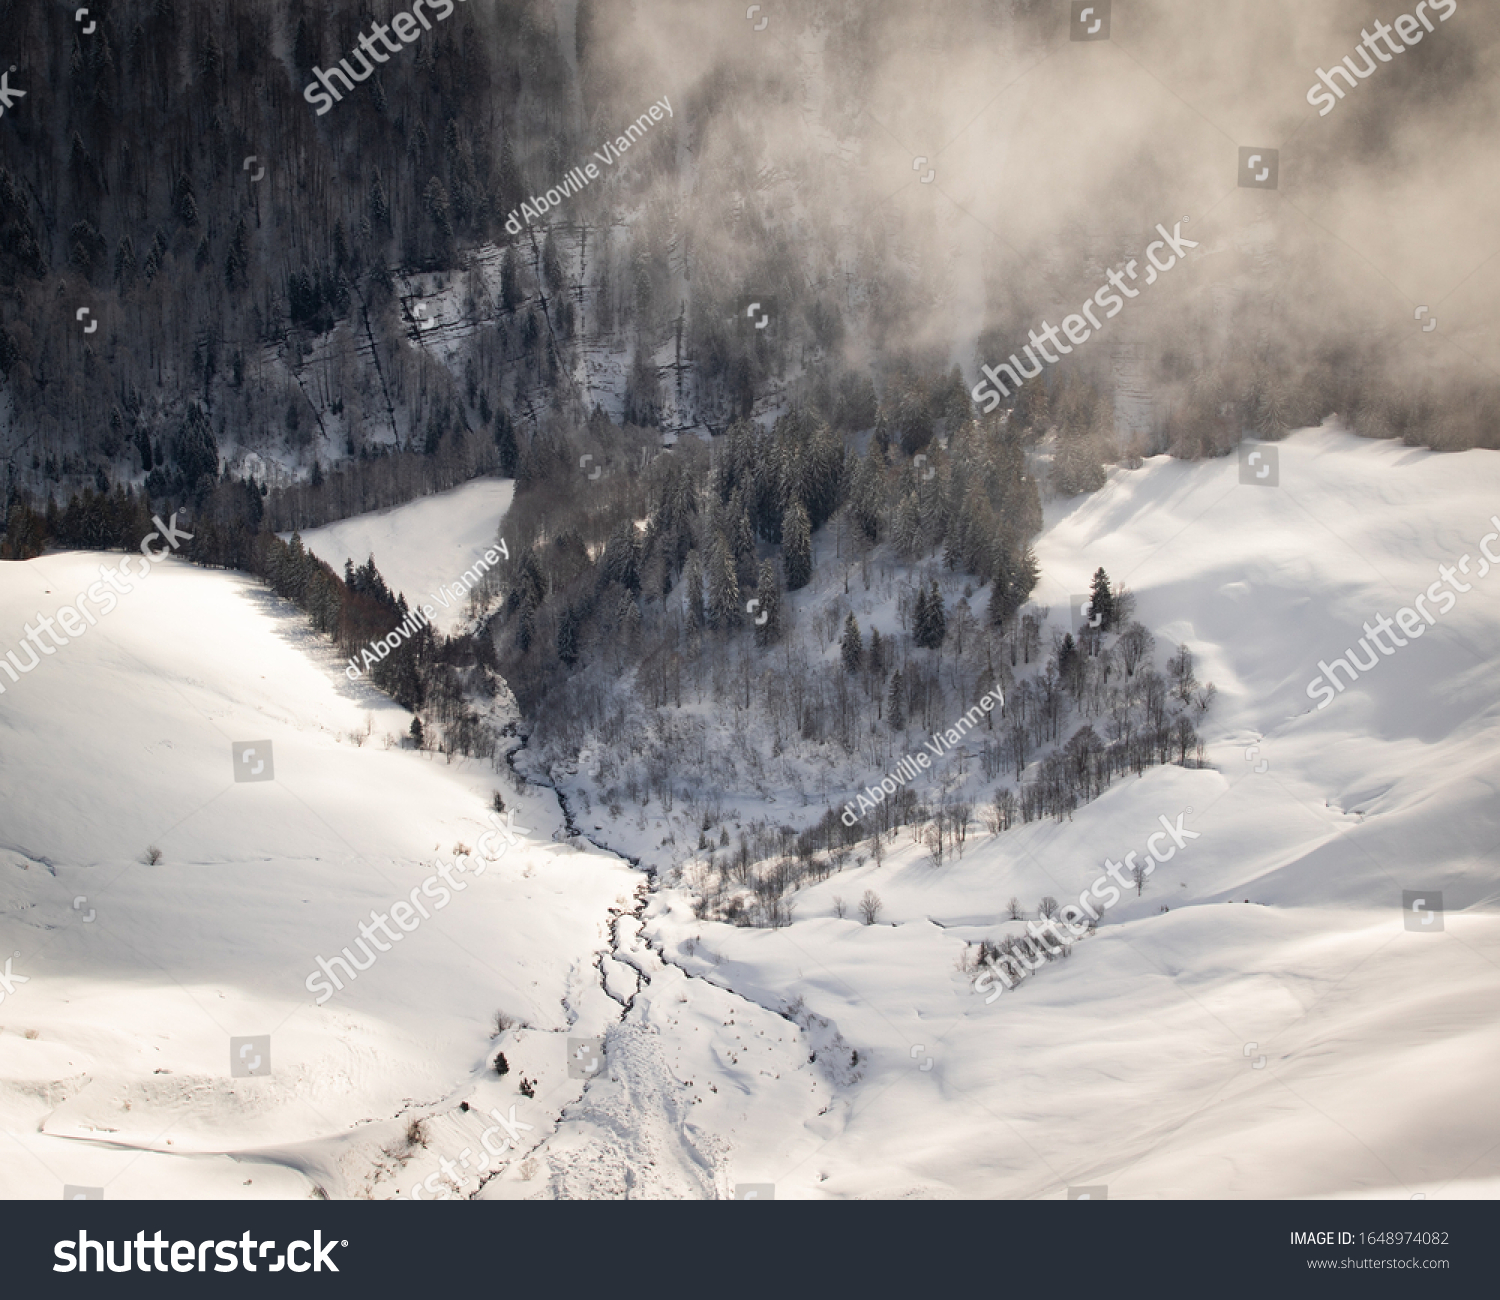 Photo taken in the french Alps in cloudy and windy conditions, which set a ferric atmosphere, with mountains emerging from the clouds, sea of clouds, forests, trees, black and white. #1648974082